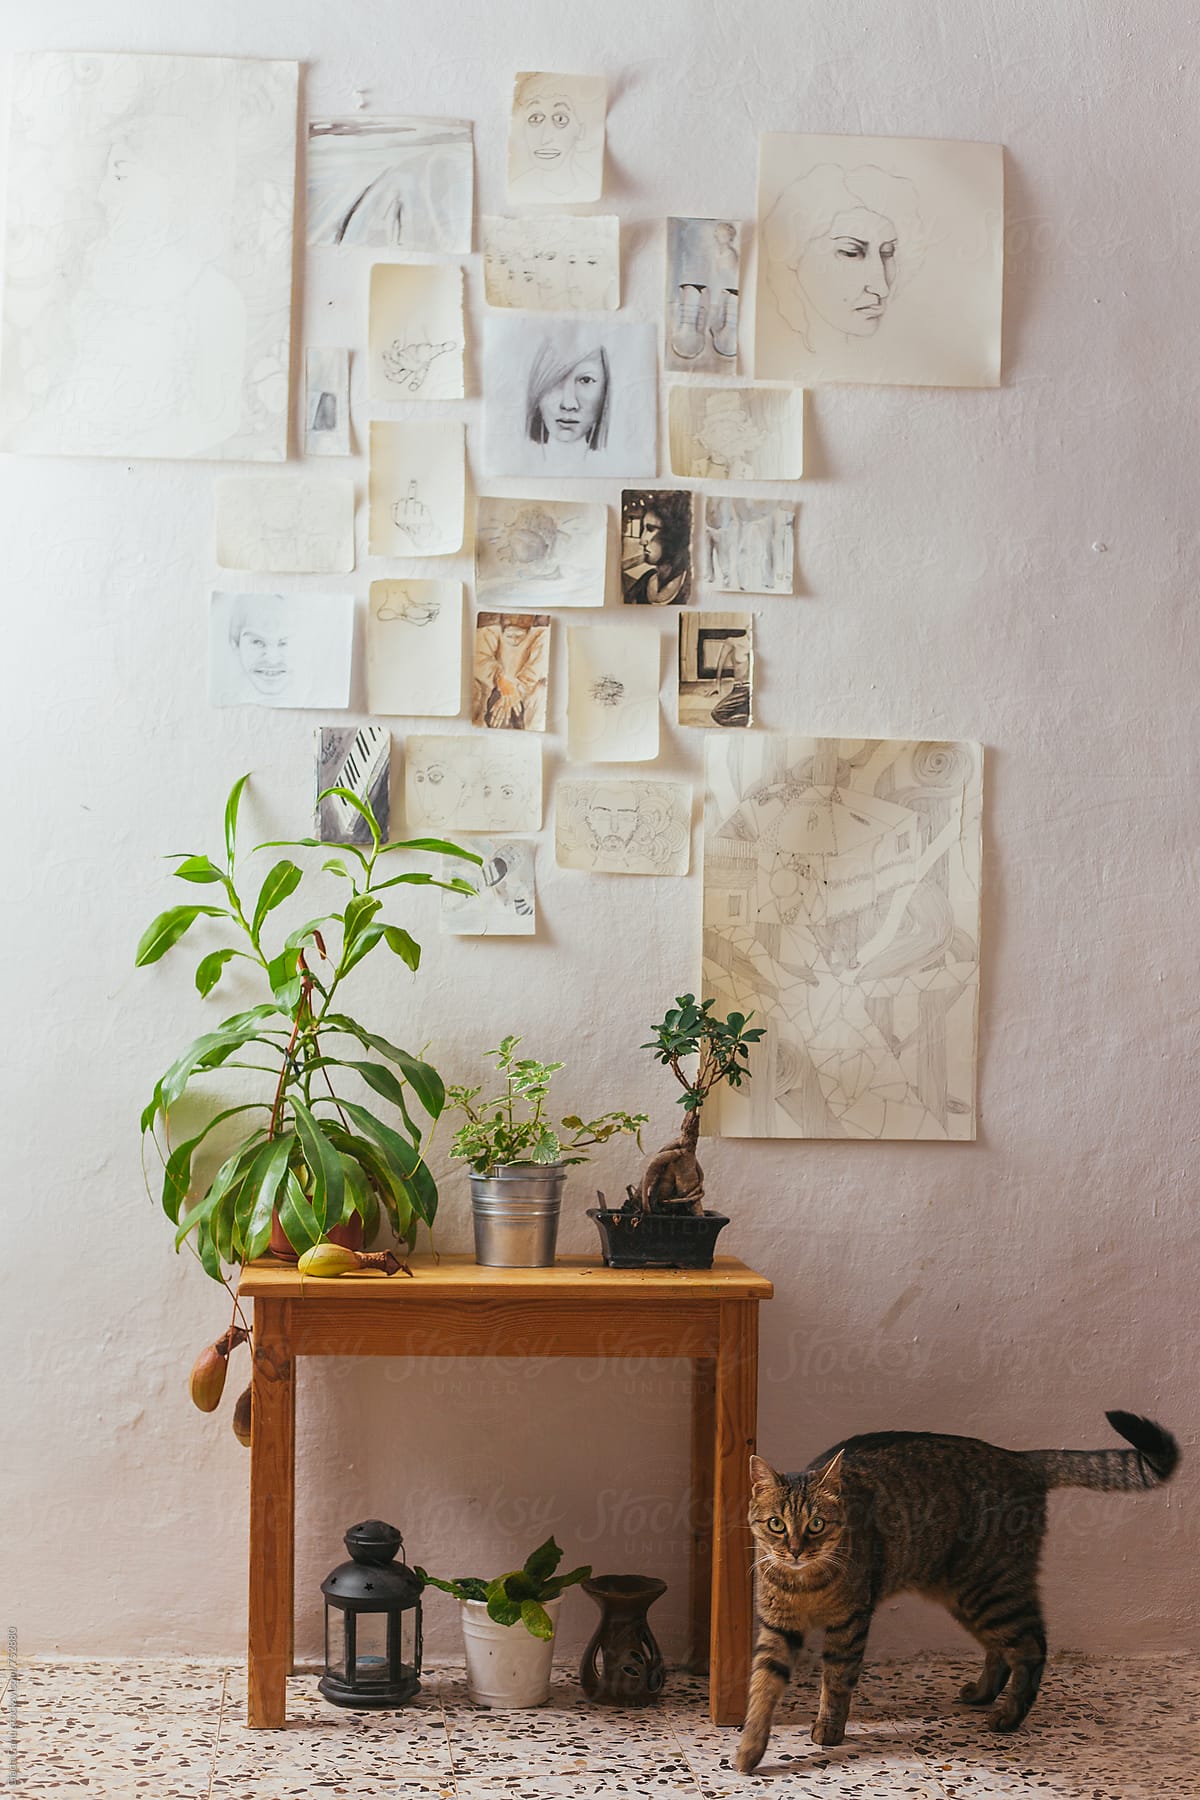 Plants on a wooden table with drawings on a white wall